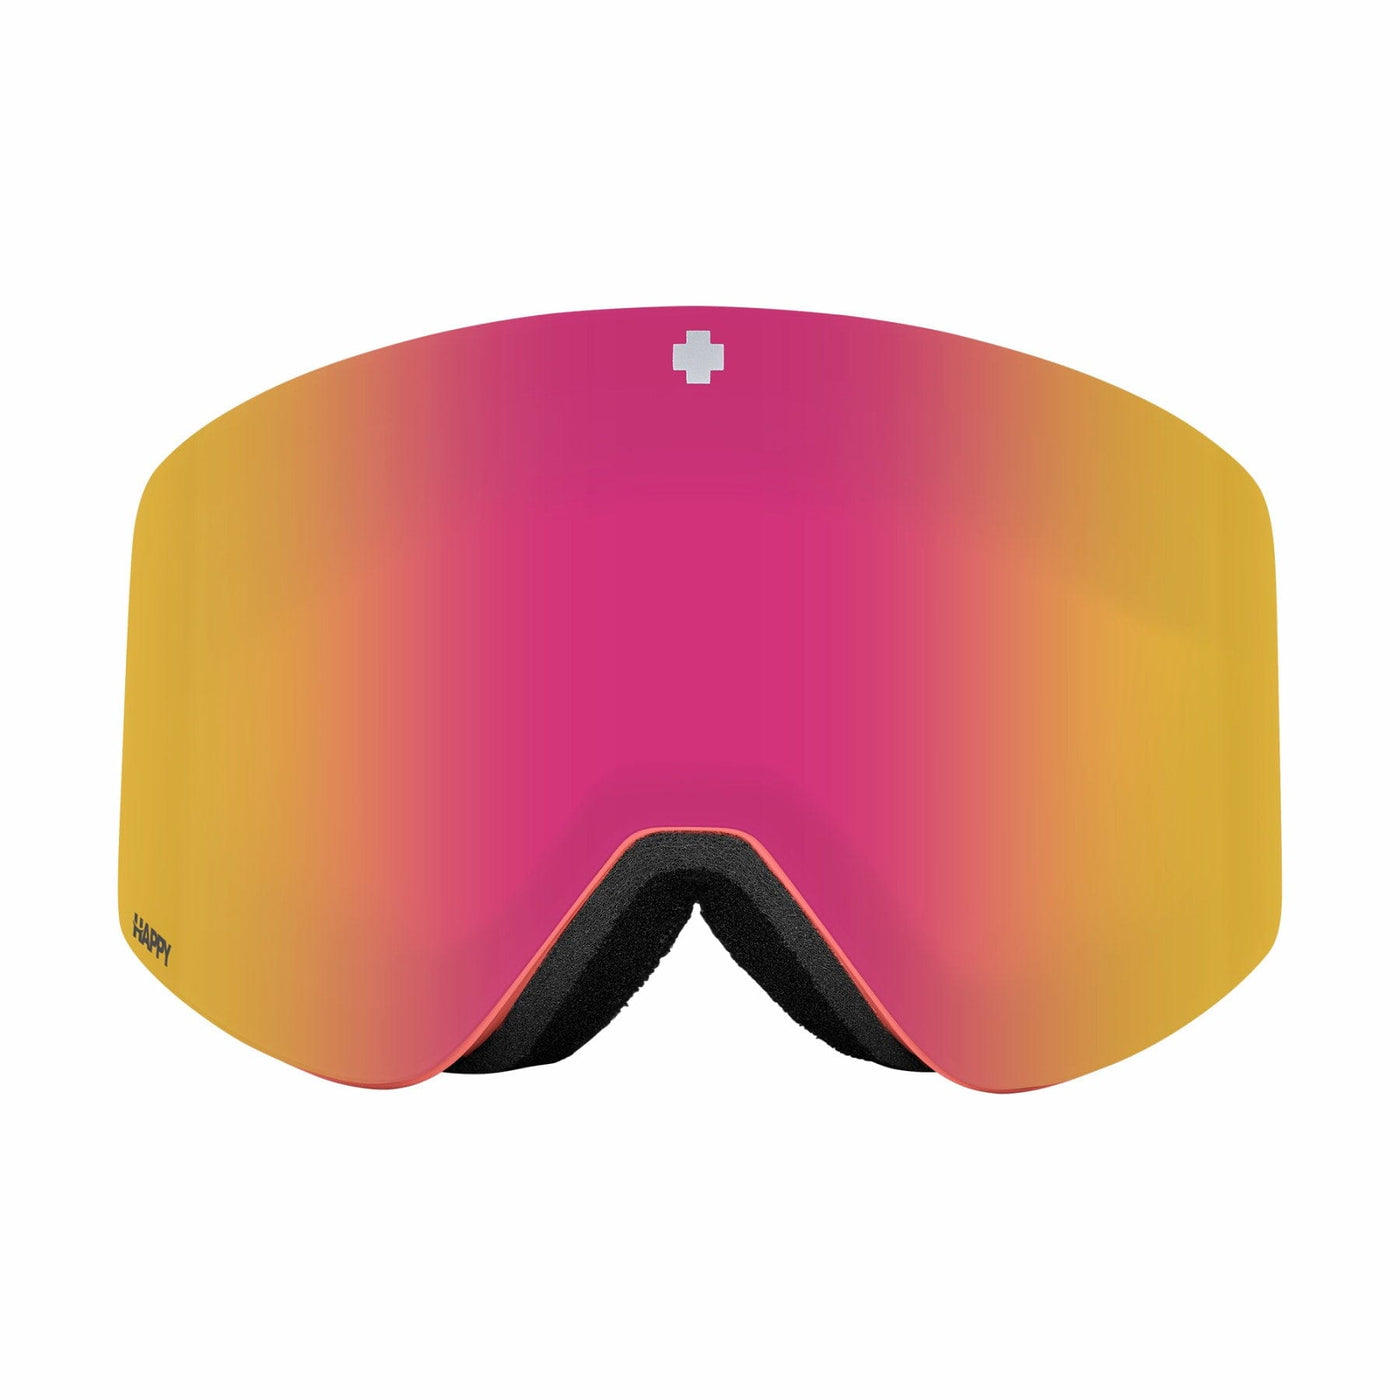 SPY Marauder SE Creamsicle Snow Goggles 8Lines Shop - Fast Shipping